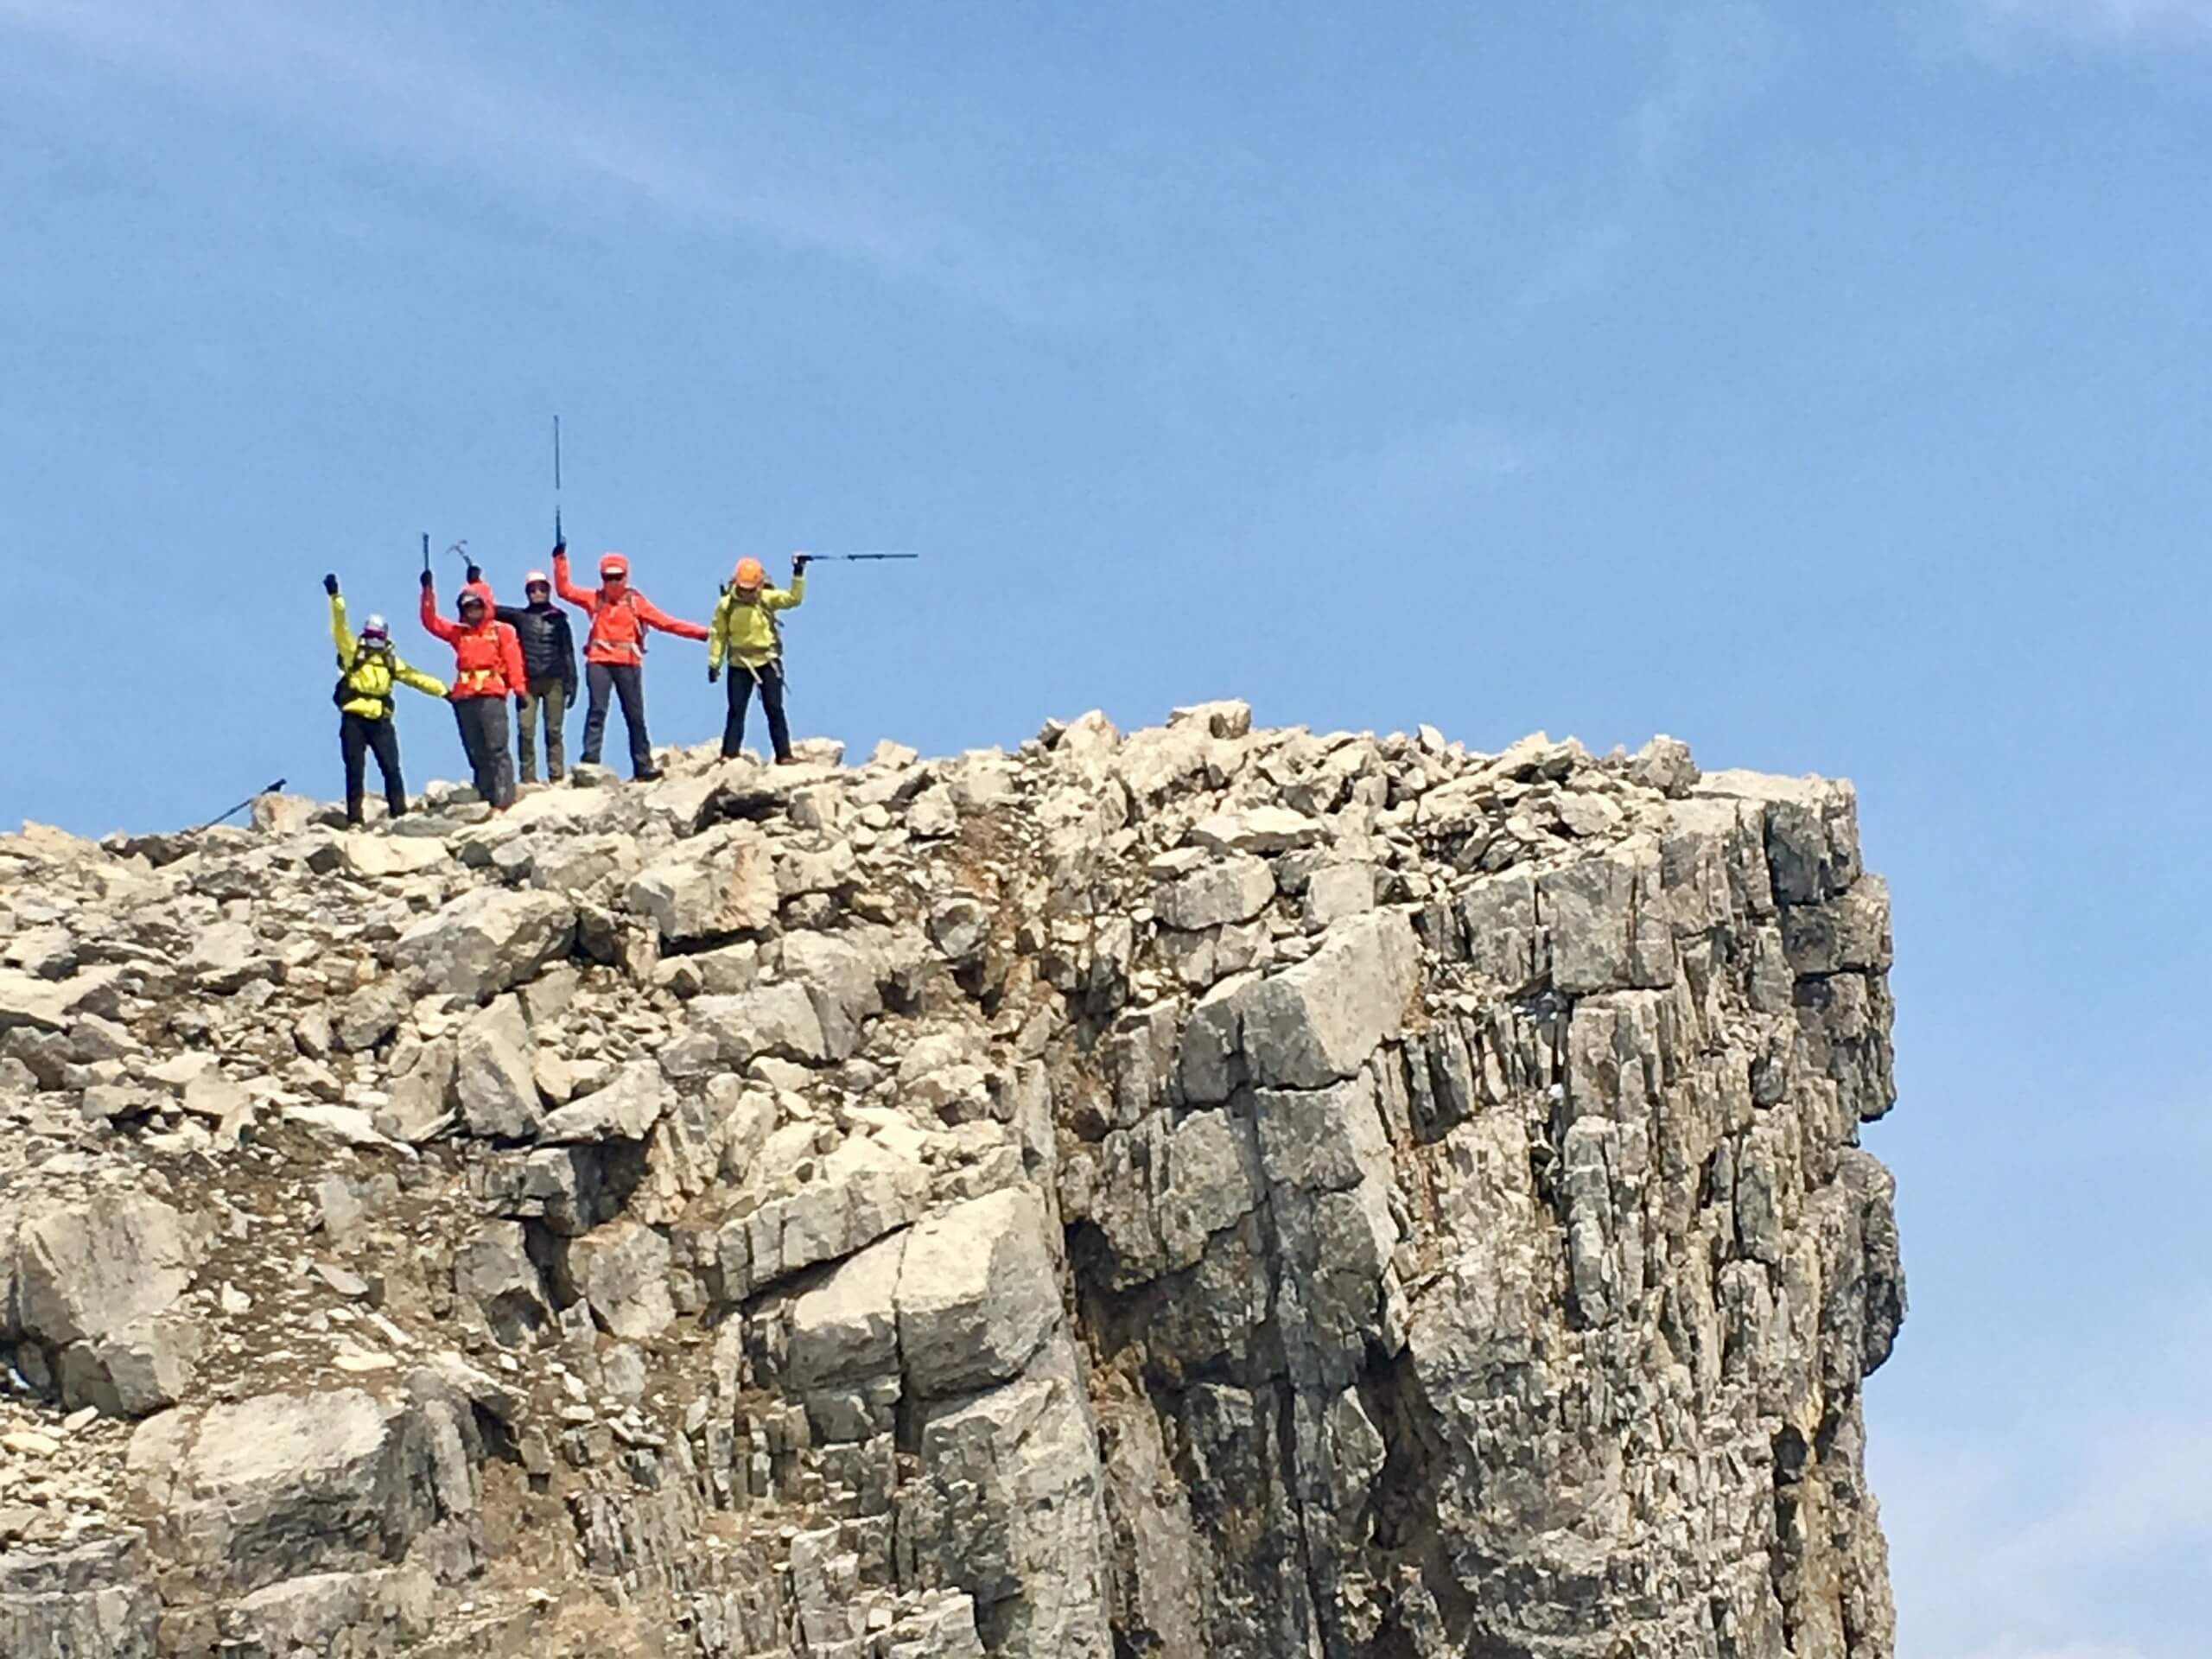 Group of ladies posing on top of the mountain